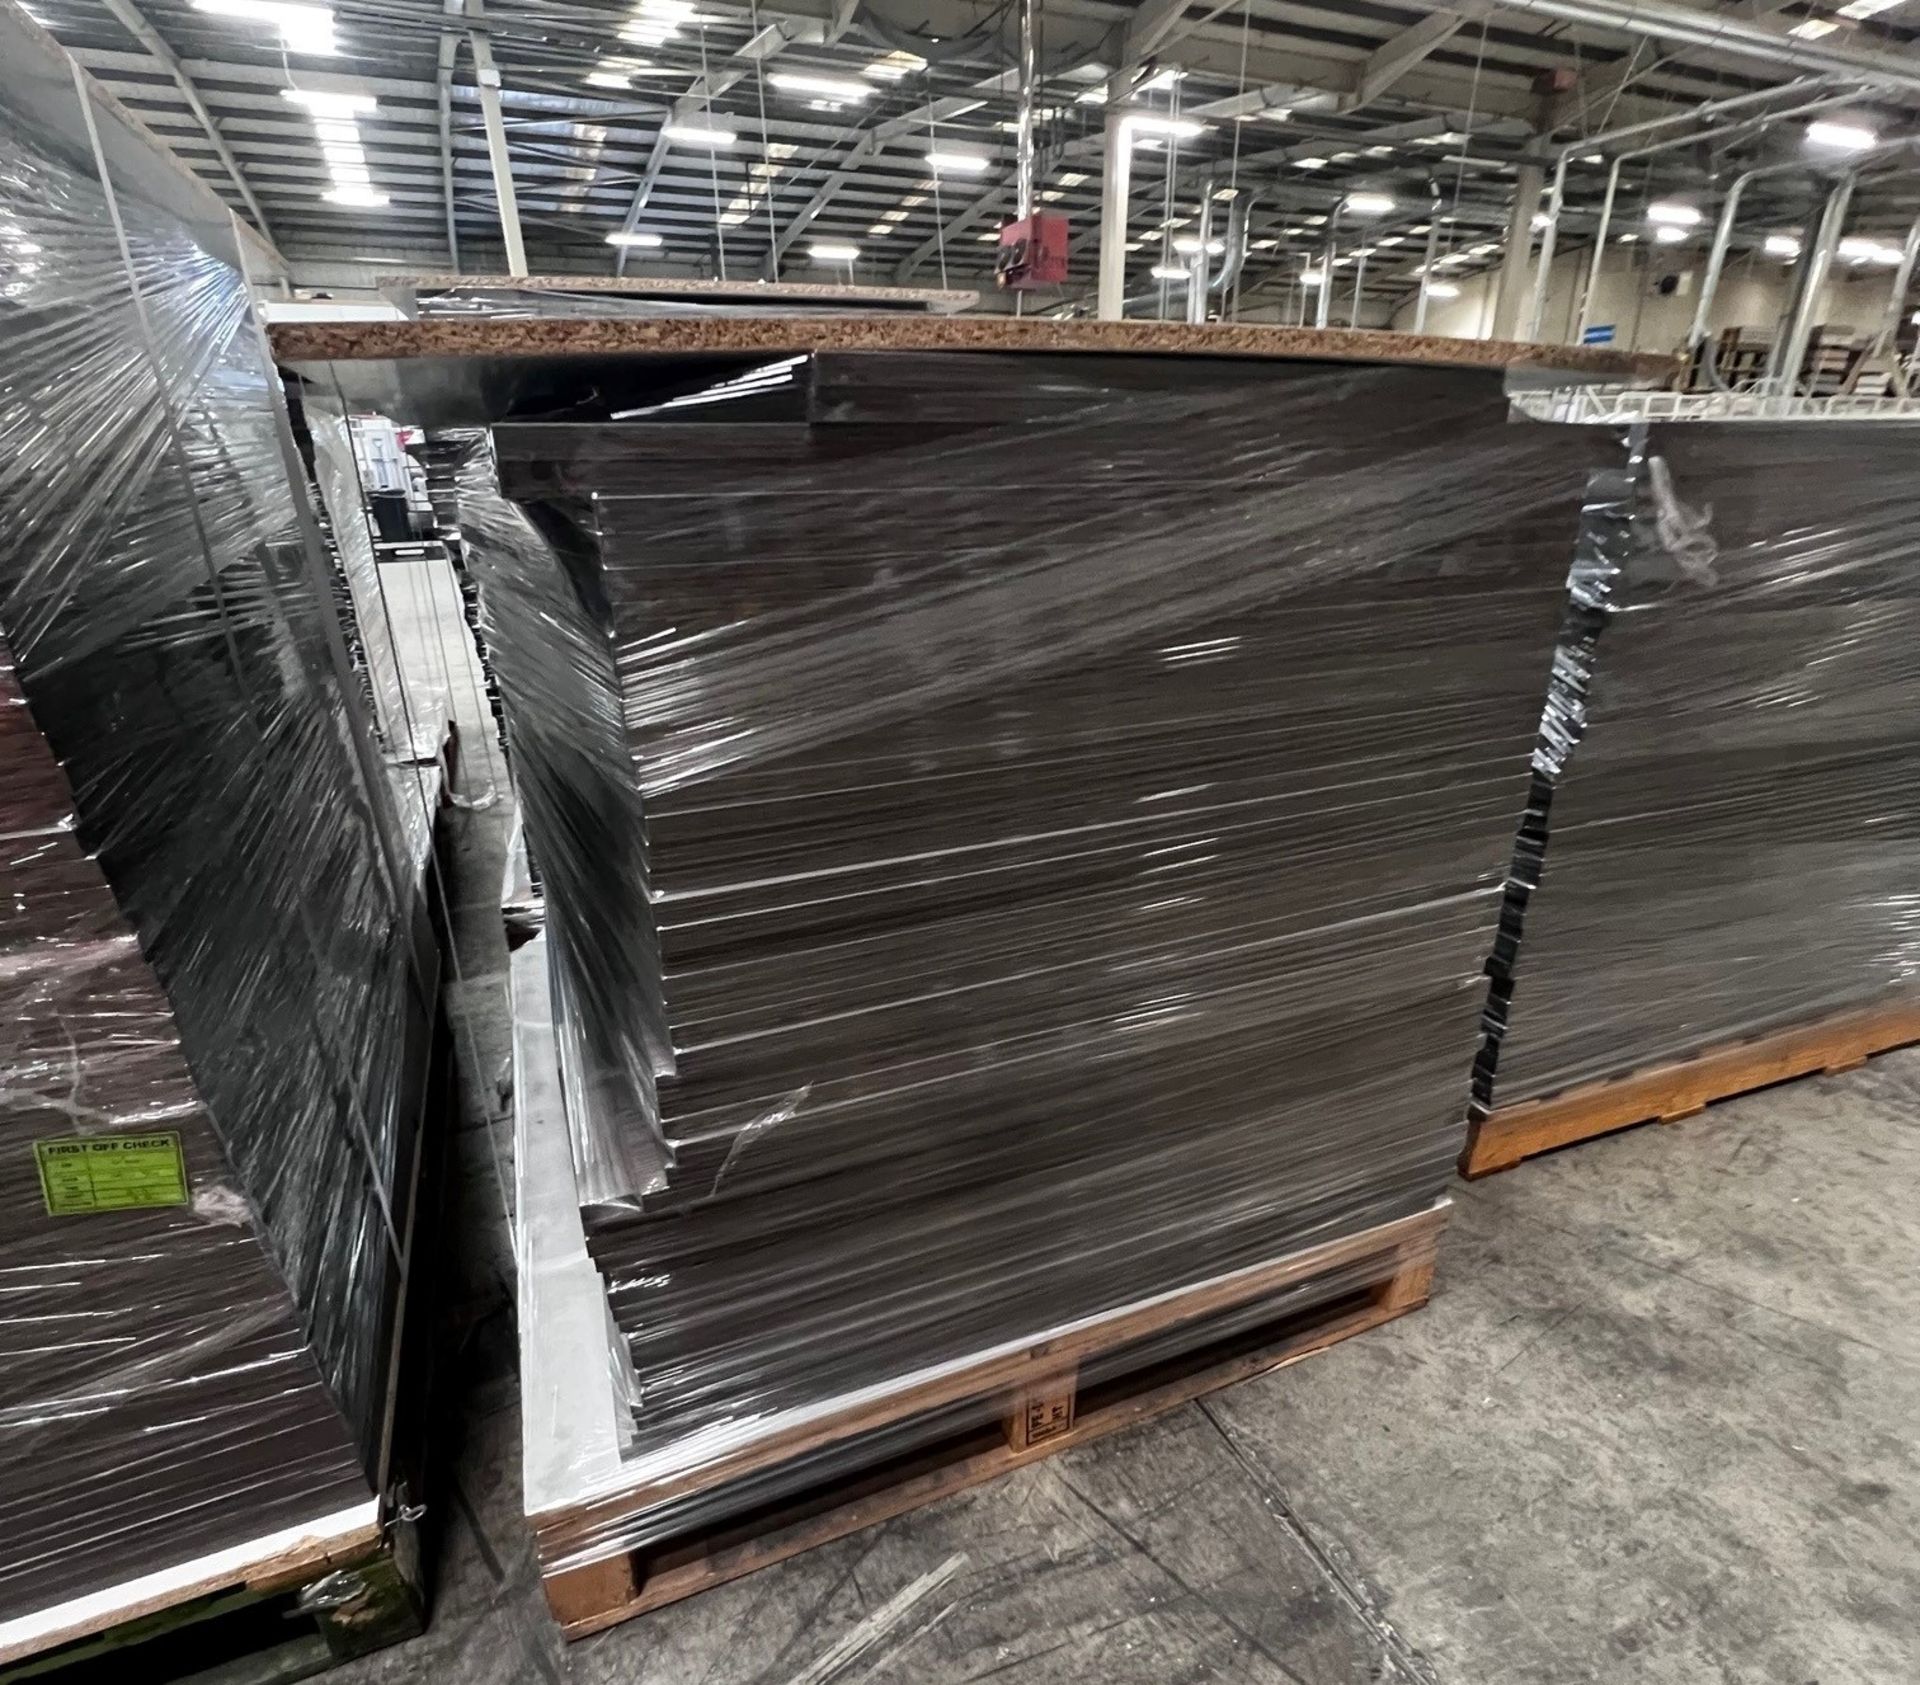 2761 Driftwood colour kitchen doors and drawer fronts, brand new 13 pallets, ready to load. - Image 6 of 14